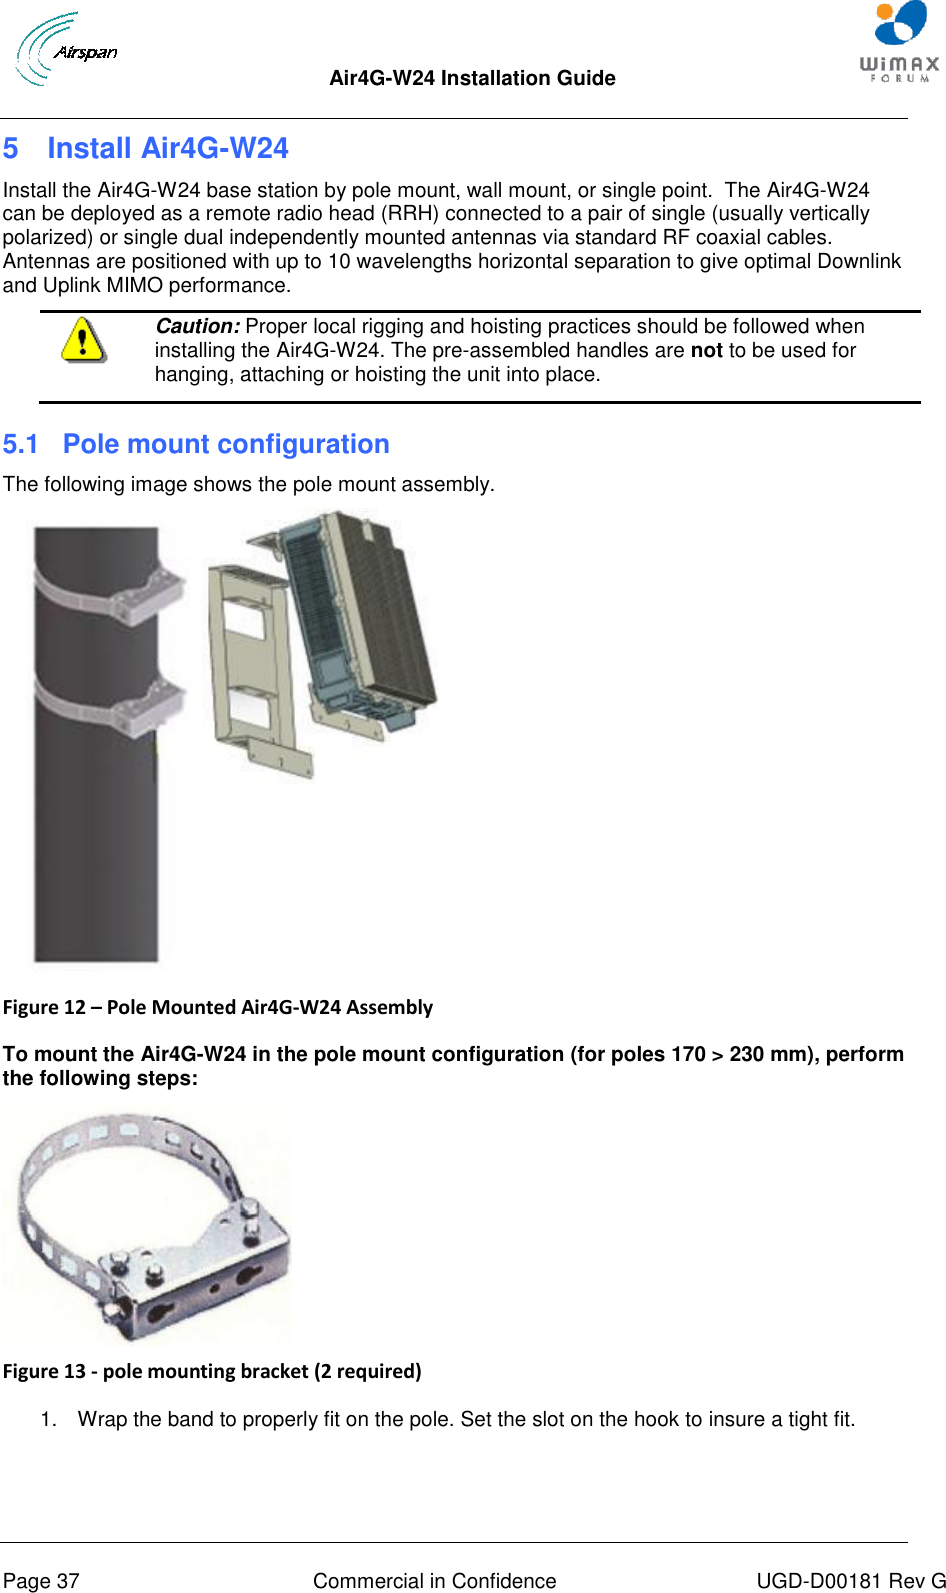  Air4G-W24 Installation Guide       Page 37  Commercial in Confidence  UGD-D00181 Rev G 5  Install Air4G-W24 Install the Air4G-W24 base station by pole mount, wall mount, or single point.  The Air4G-W24 can be deployed as a remote radio head (RRH) connected to a pair of single (usually vertically polarized) or single dual independently mounted antennas via standard RF coaxial cables.  Antennas are positioned with up to 10 wavelengths horizontal separation to give optimal Downlink and Uplink MIMO performance.  Caution: Proper local rigging and hoisting practices should be followed when installing the Air4G-W24. The pre-assembled handles are not to be used for hanging, attaching or hoisting the unit into place.  5.1  Pole mount configuration The following image shows the pole mount assembly.  Figure 12 – Pole Mounted Air4G-W24 Assembly  To mount the Air4G-W24 in the pole mount configuration (for poles 170 &gt; 230 mm), perform the following steps:  Figure 13 - pole mounting bracket (2 required)  1.  Wrap the band to properly fit on the pole. Set the slot on the hook to insure a tight fit. 